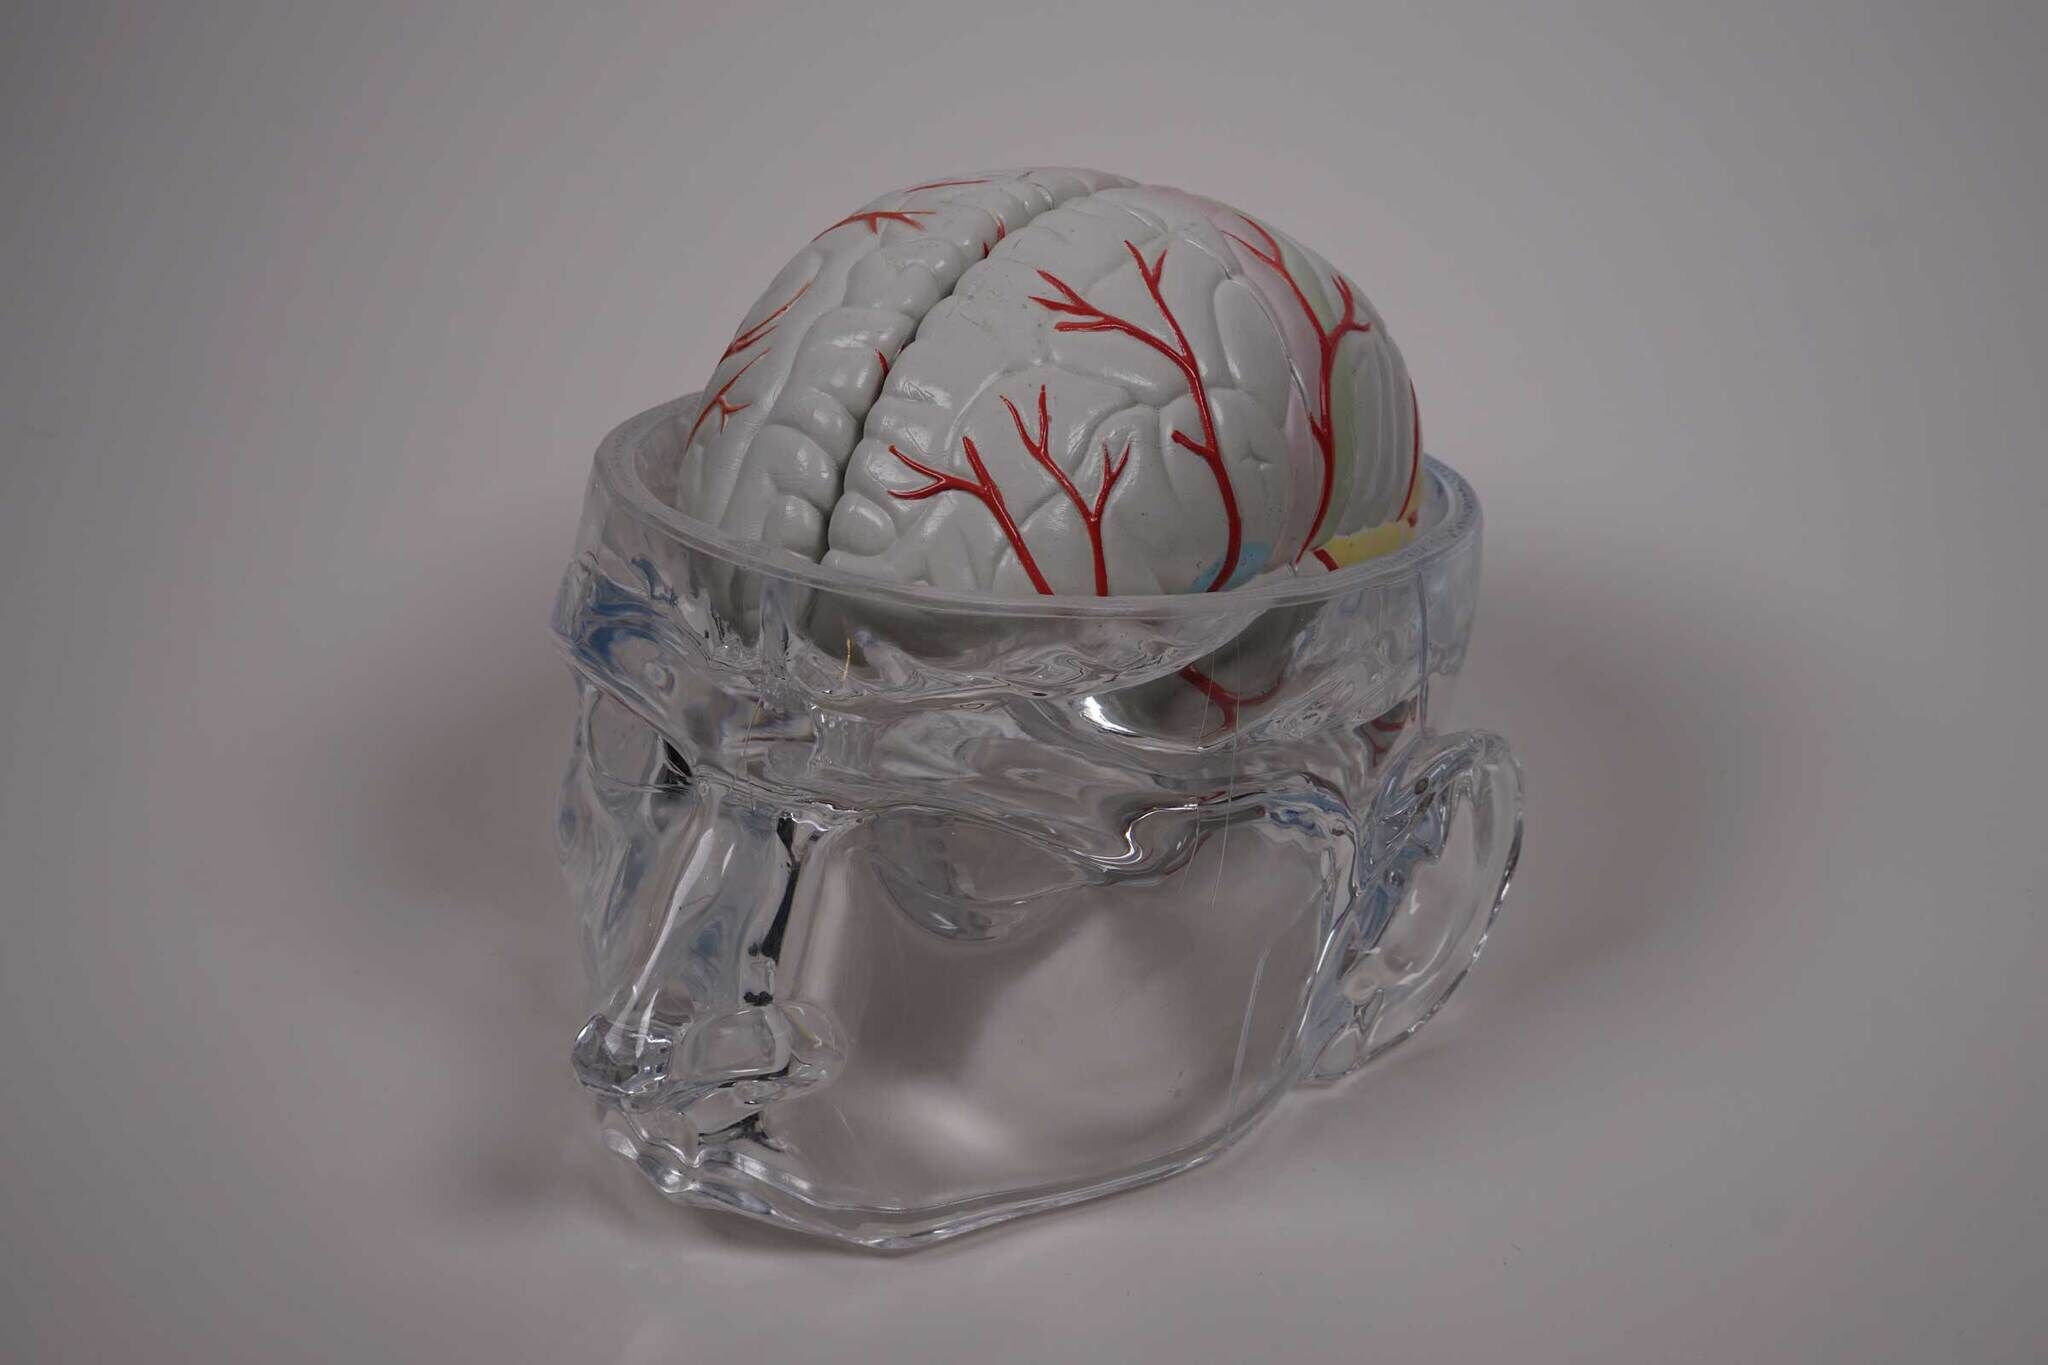 A transparent skull model with a white brain inside, showing red blood vessels on a grey background.